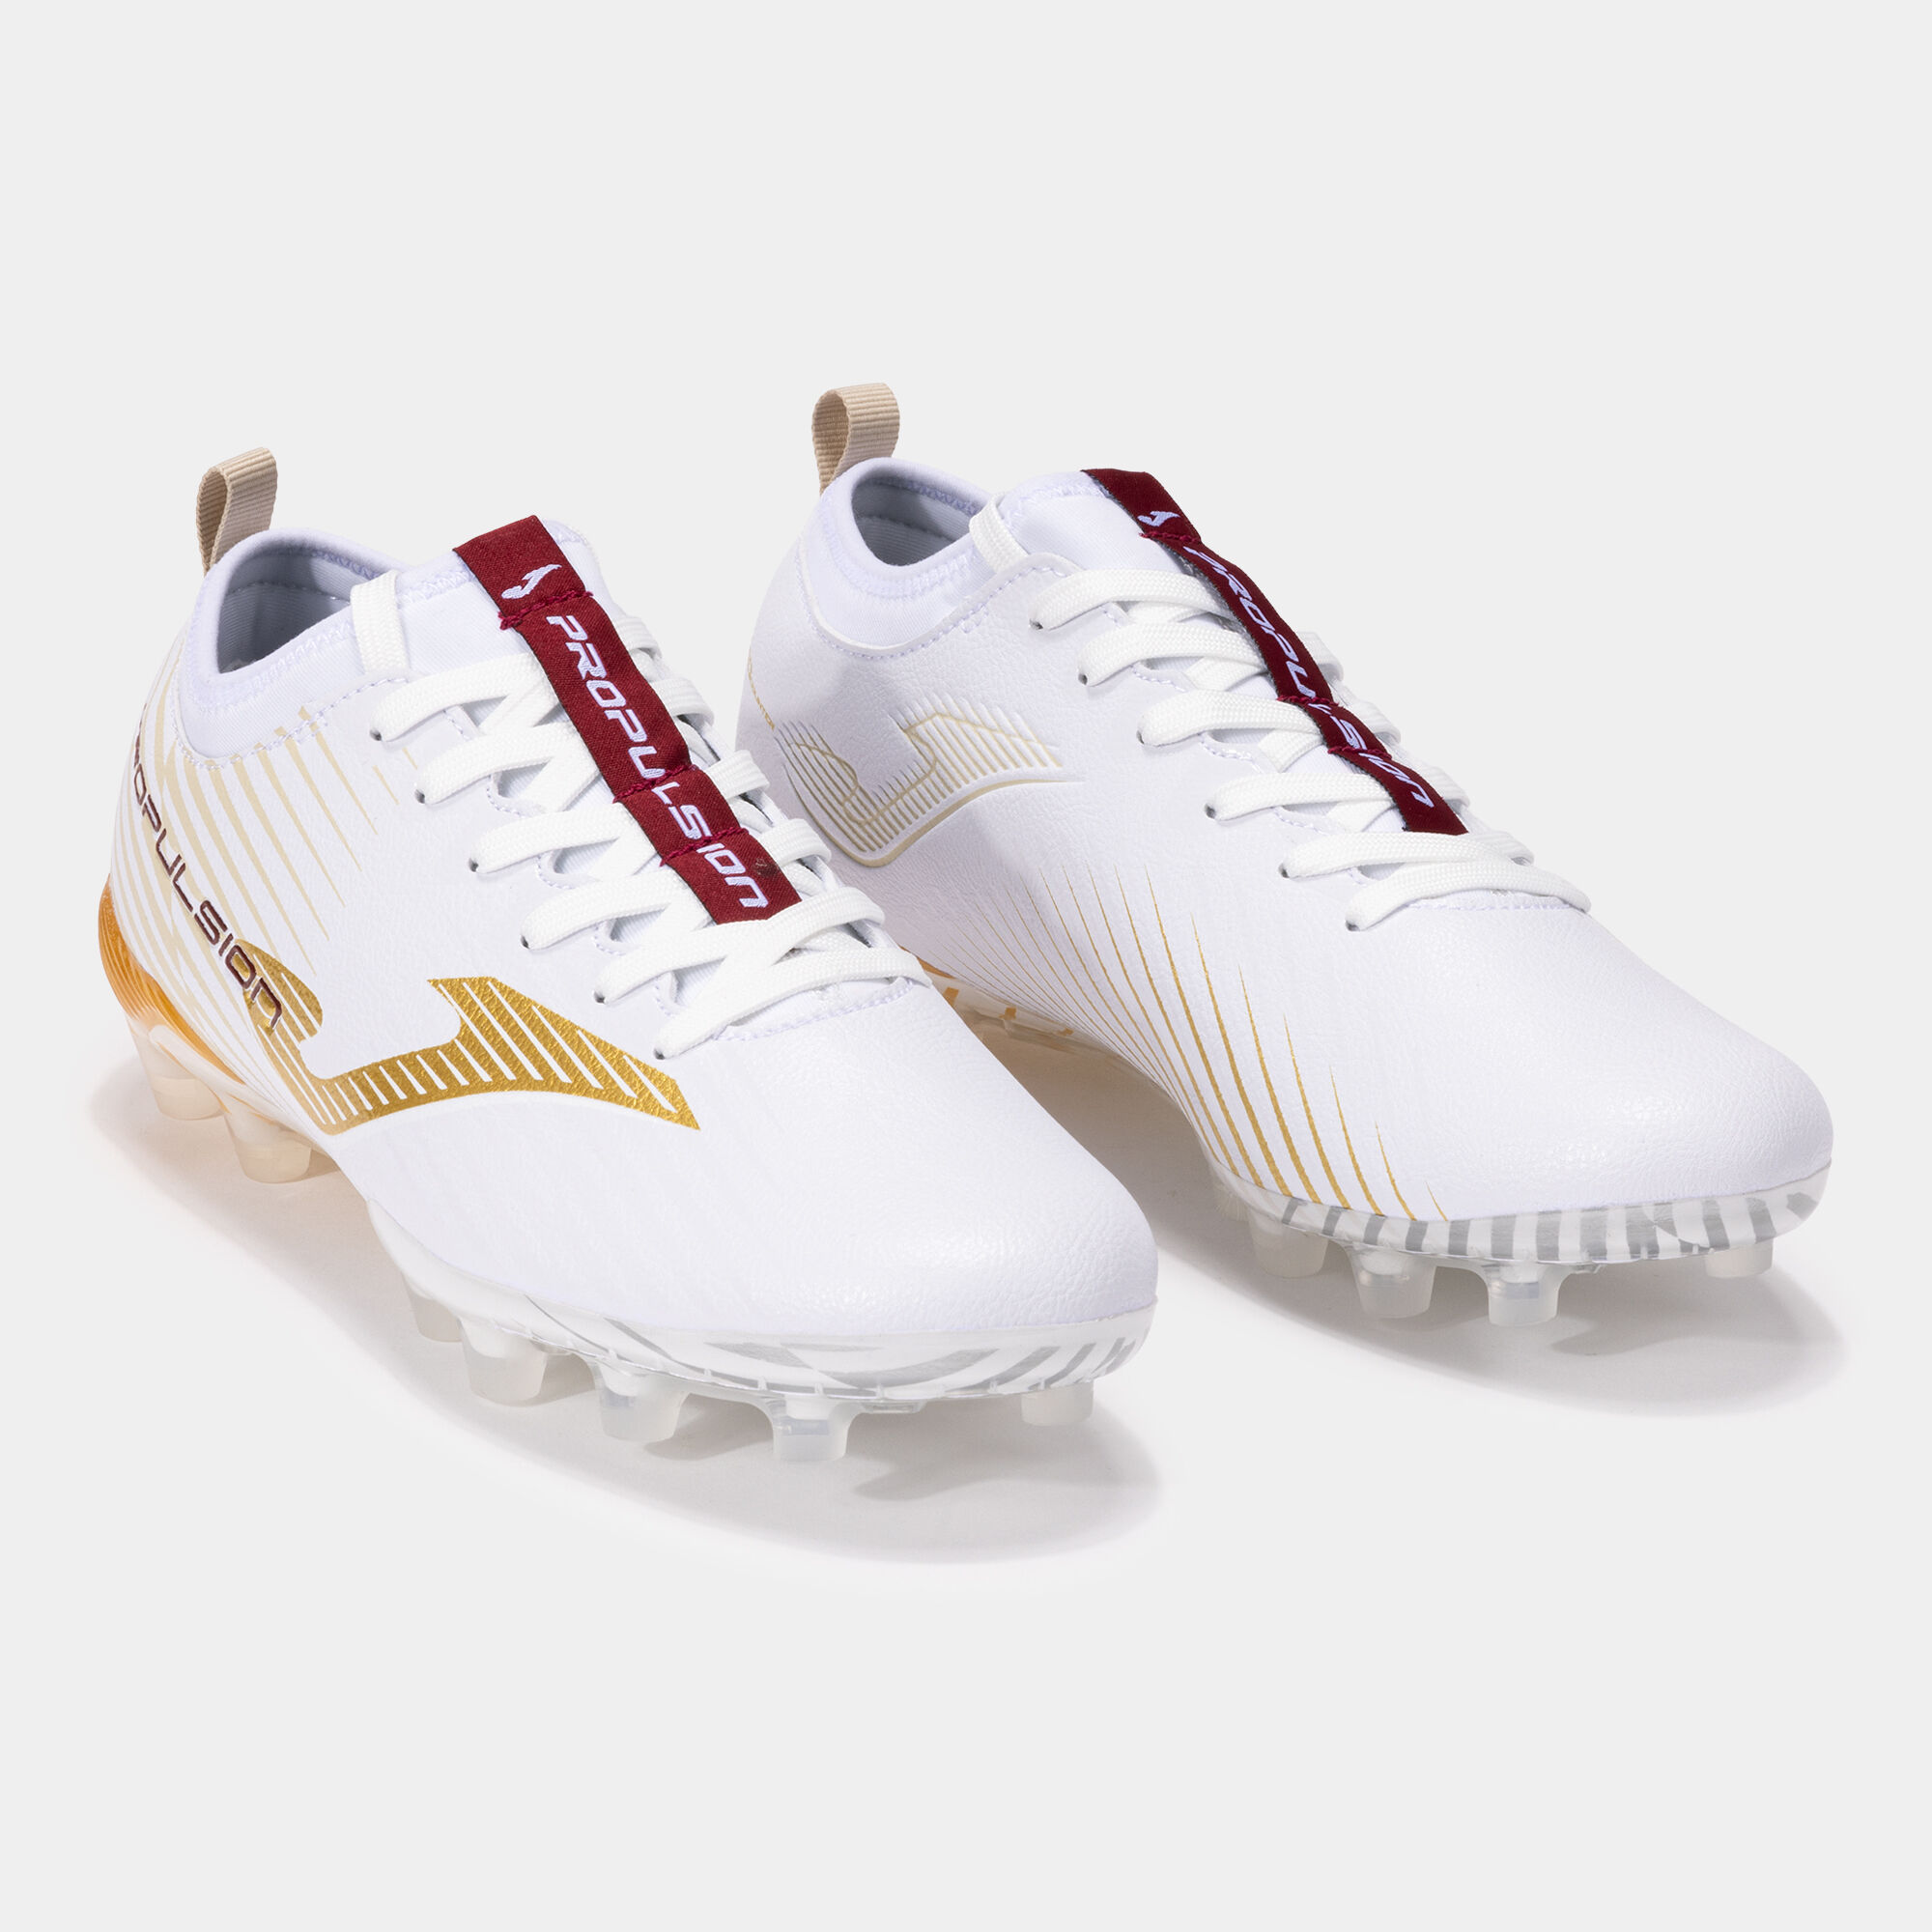 Football boots Propulsion Cup 24 firm ground FG white gold